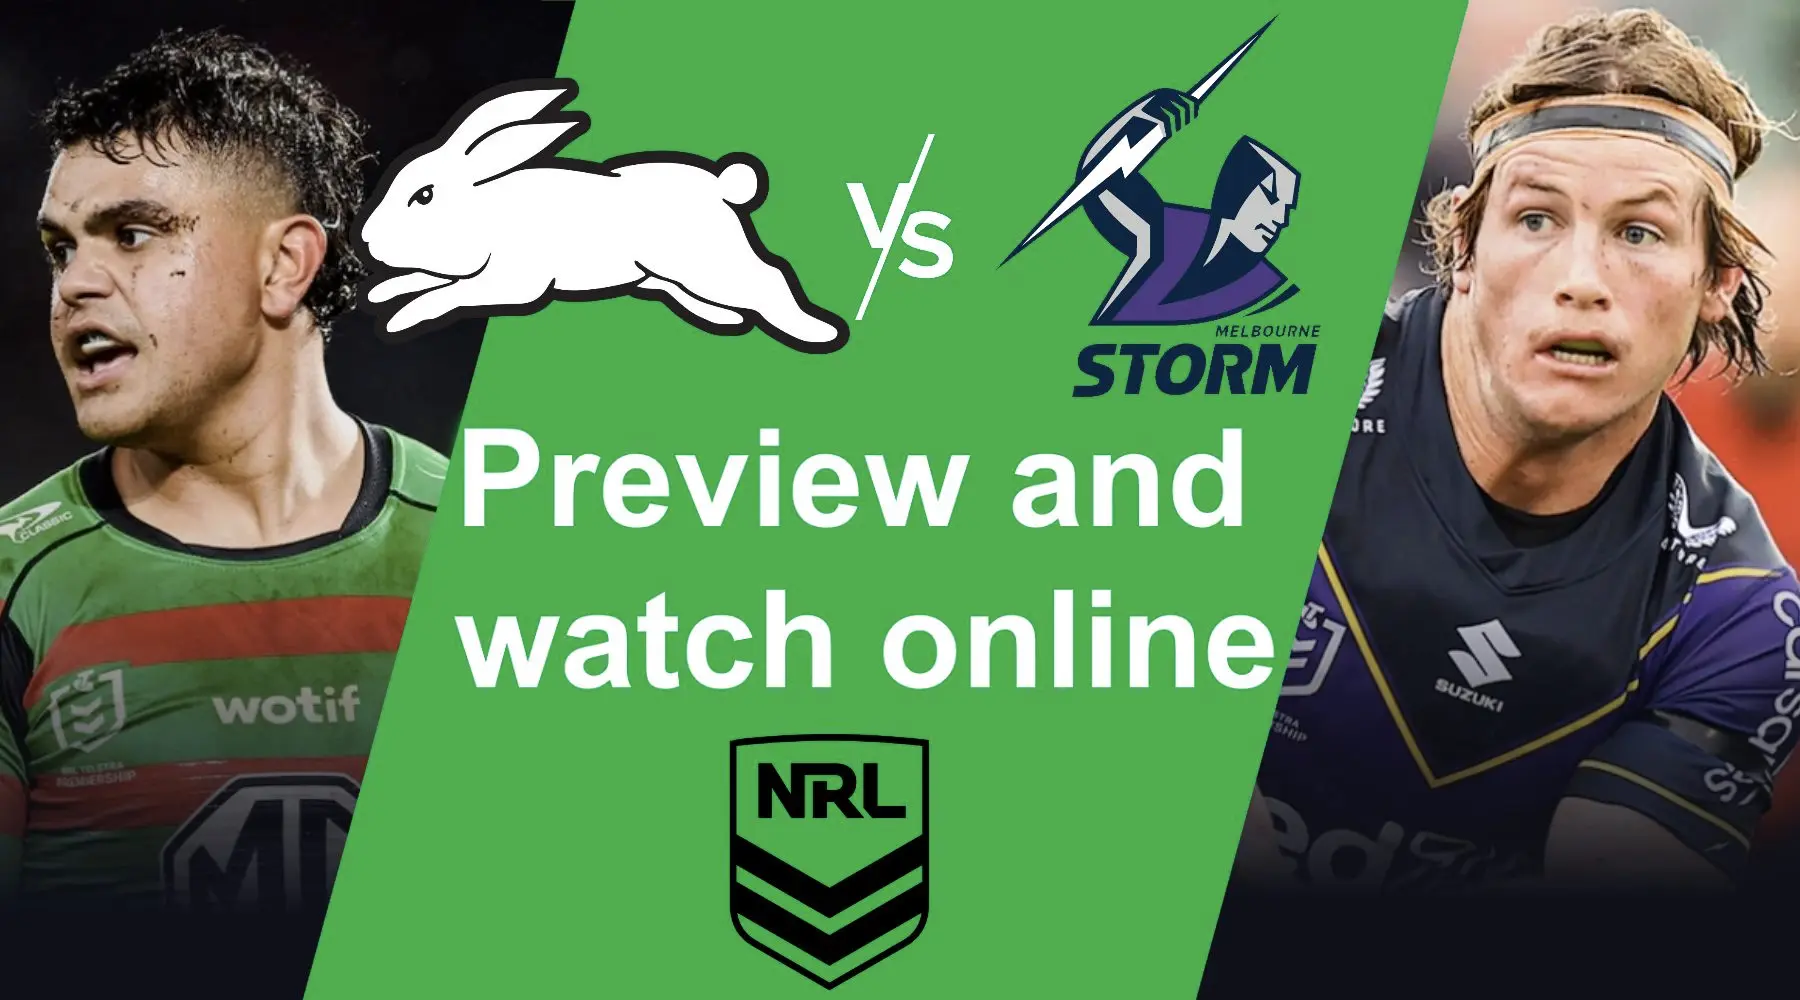 How to watch Rabbitohs vs Storm NRL live and match preview